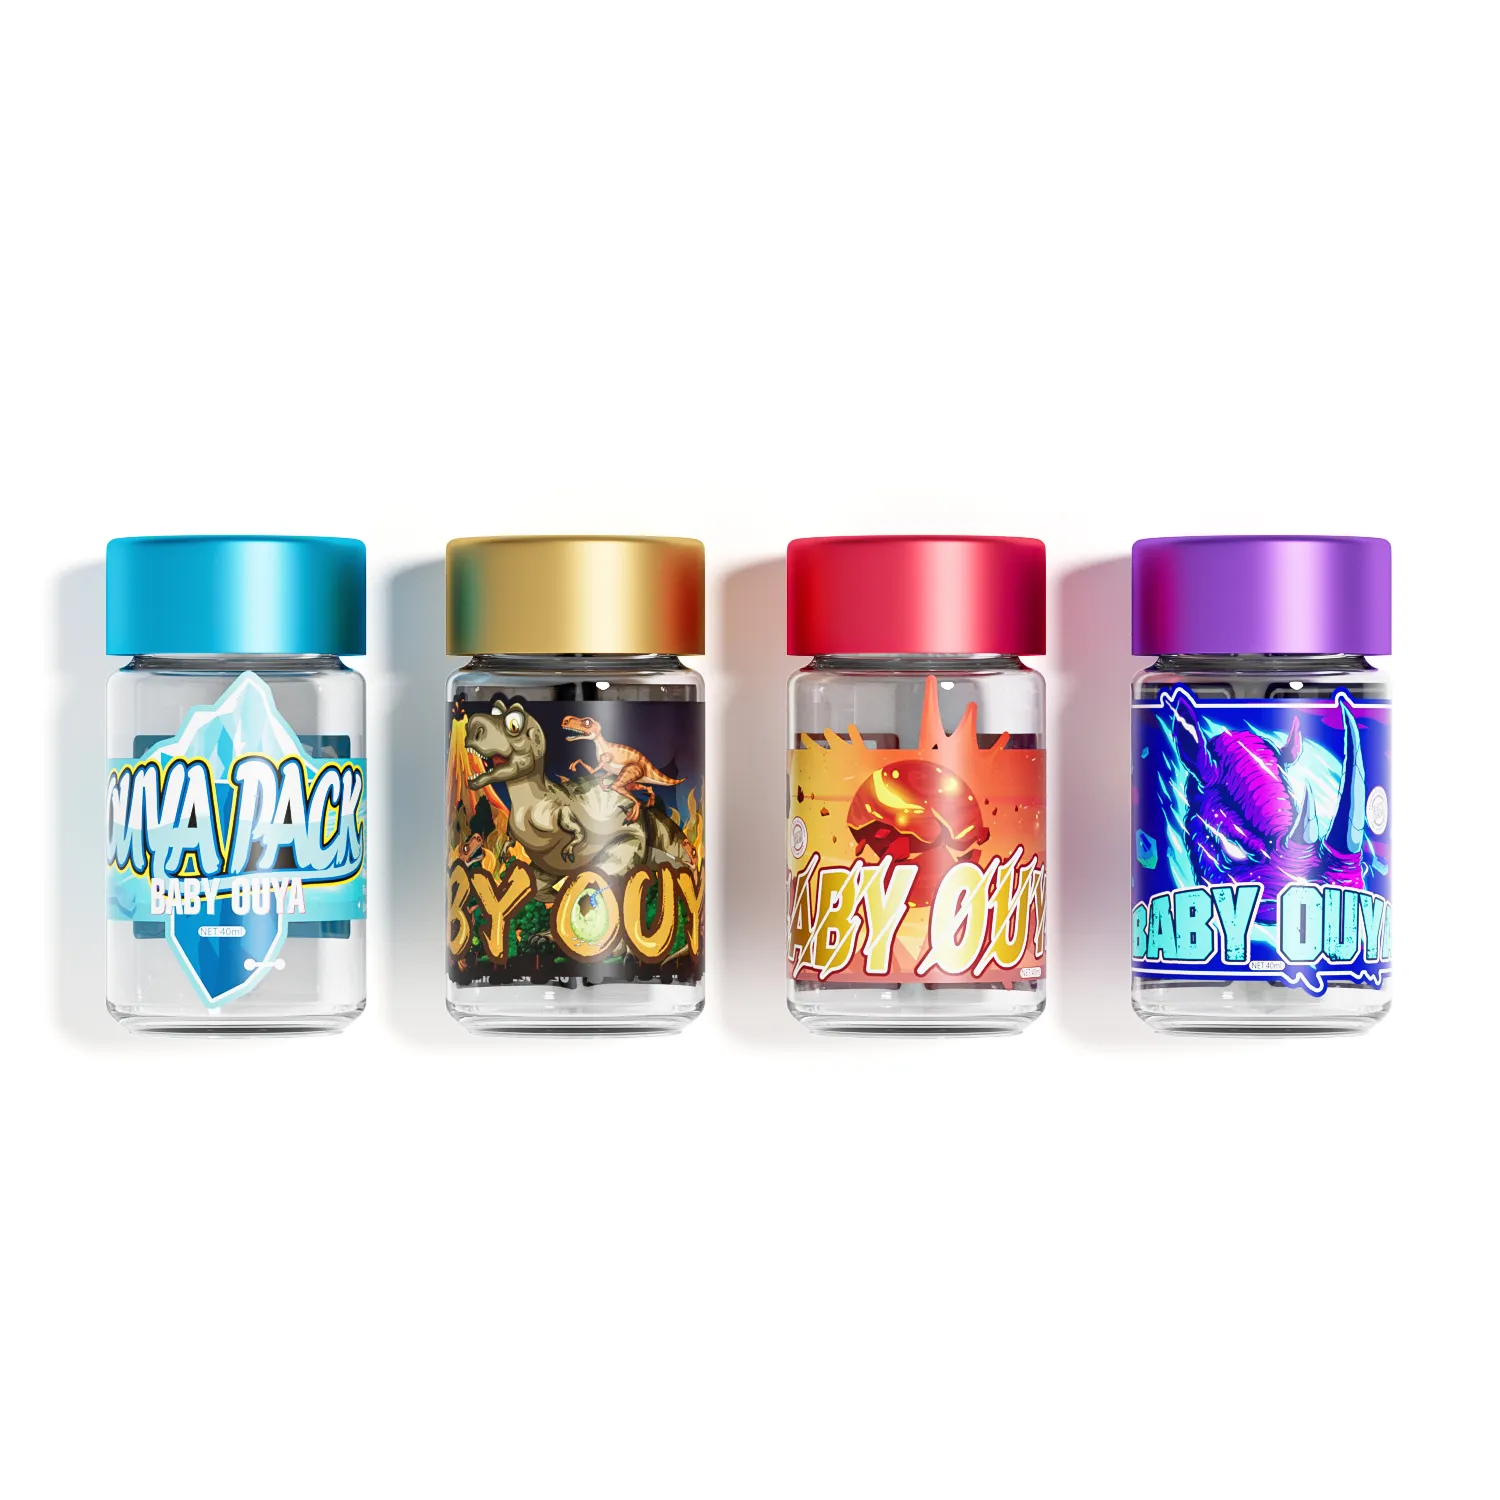 Custom Printed 2.5g pre roll jars 5 pack airtight smell proof container child proof glass bottle 30g child resistant glass jars